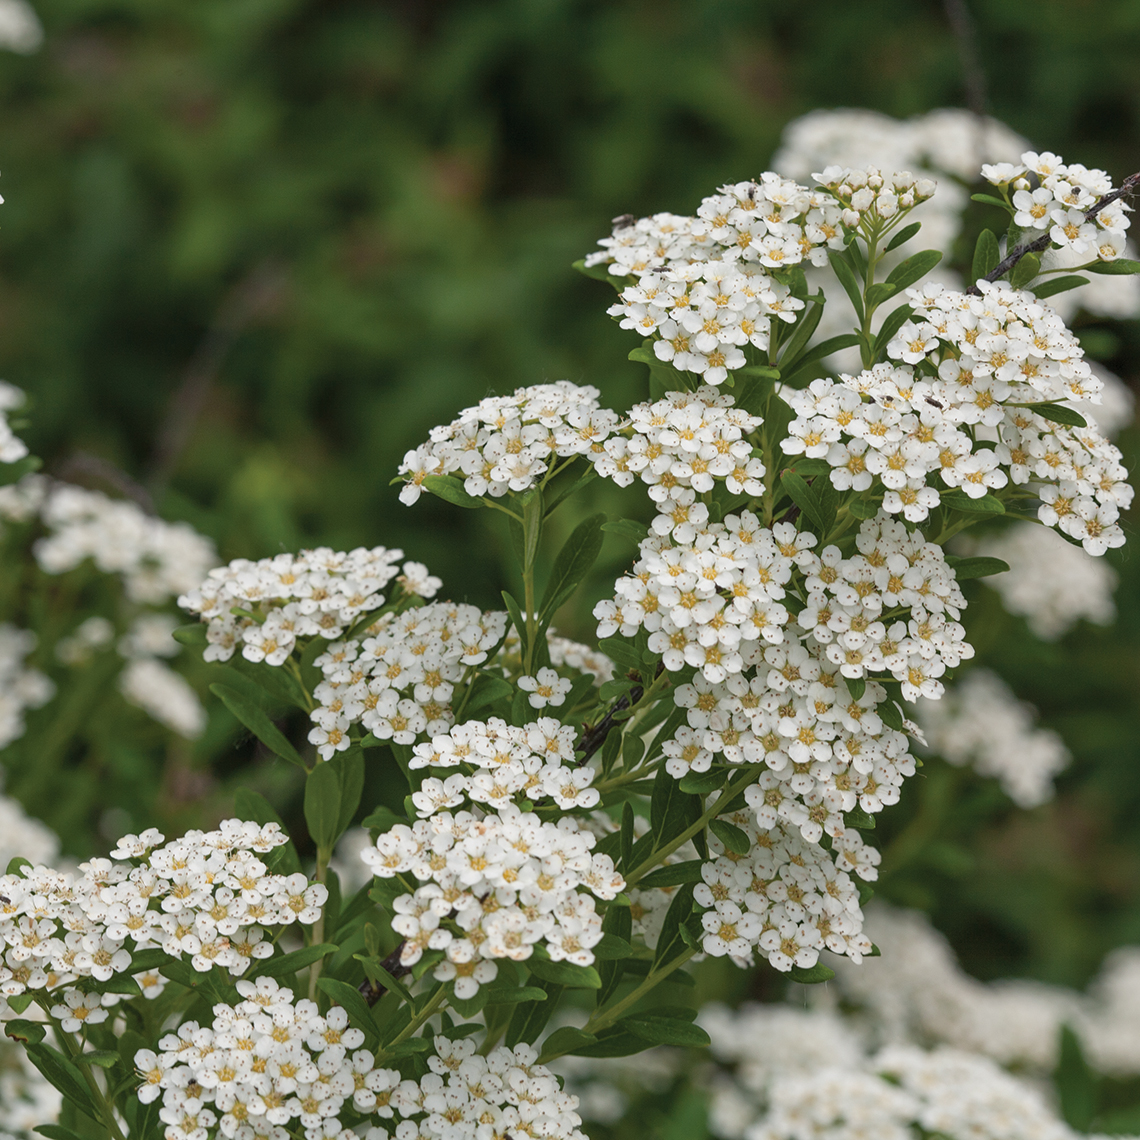 Close up of Wedding Cake Spiraea branch loaded with white blooms